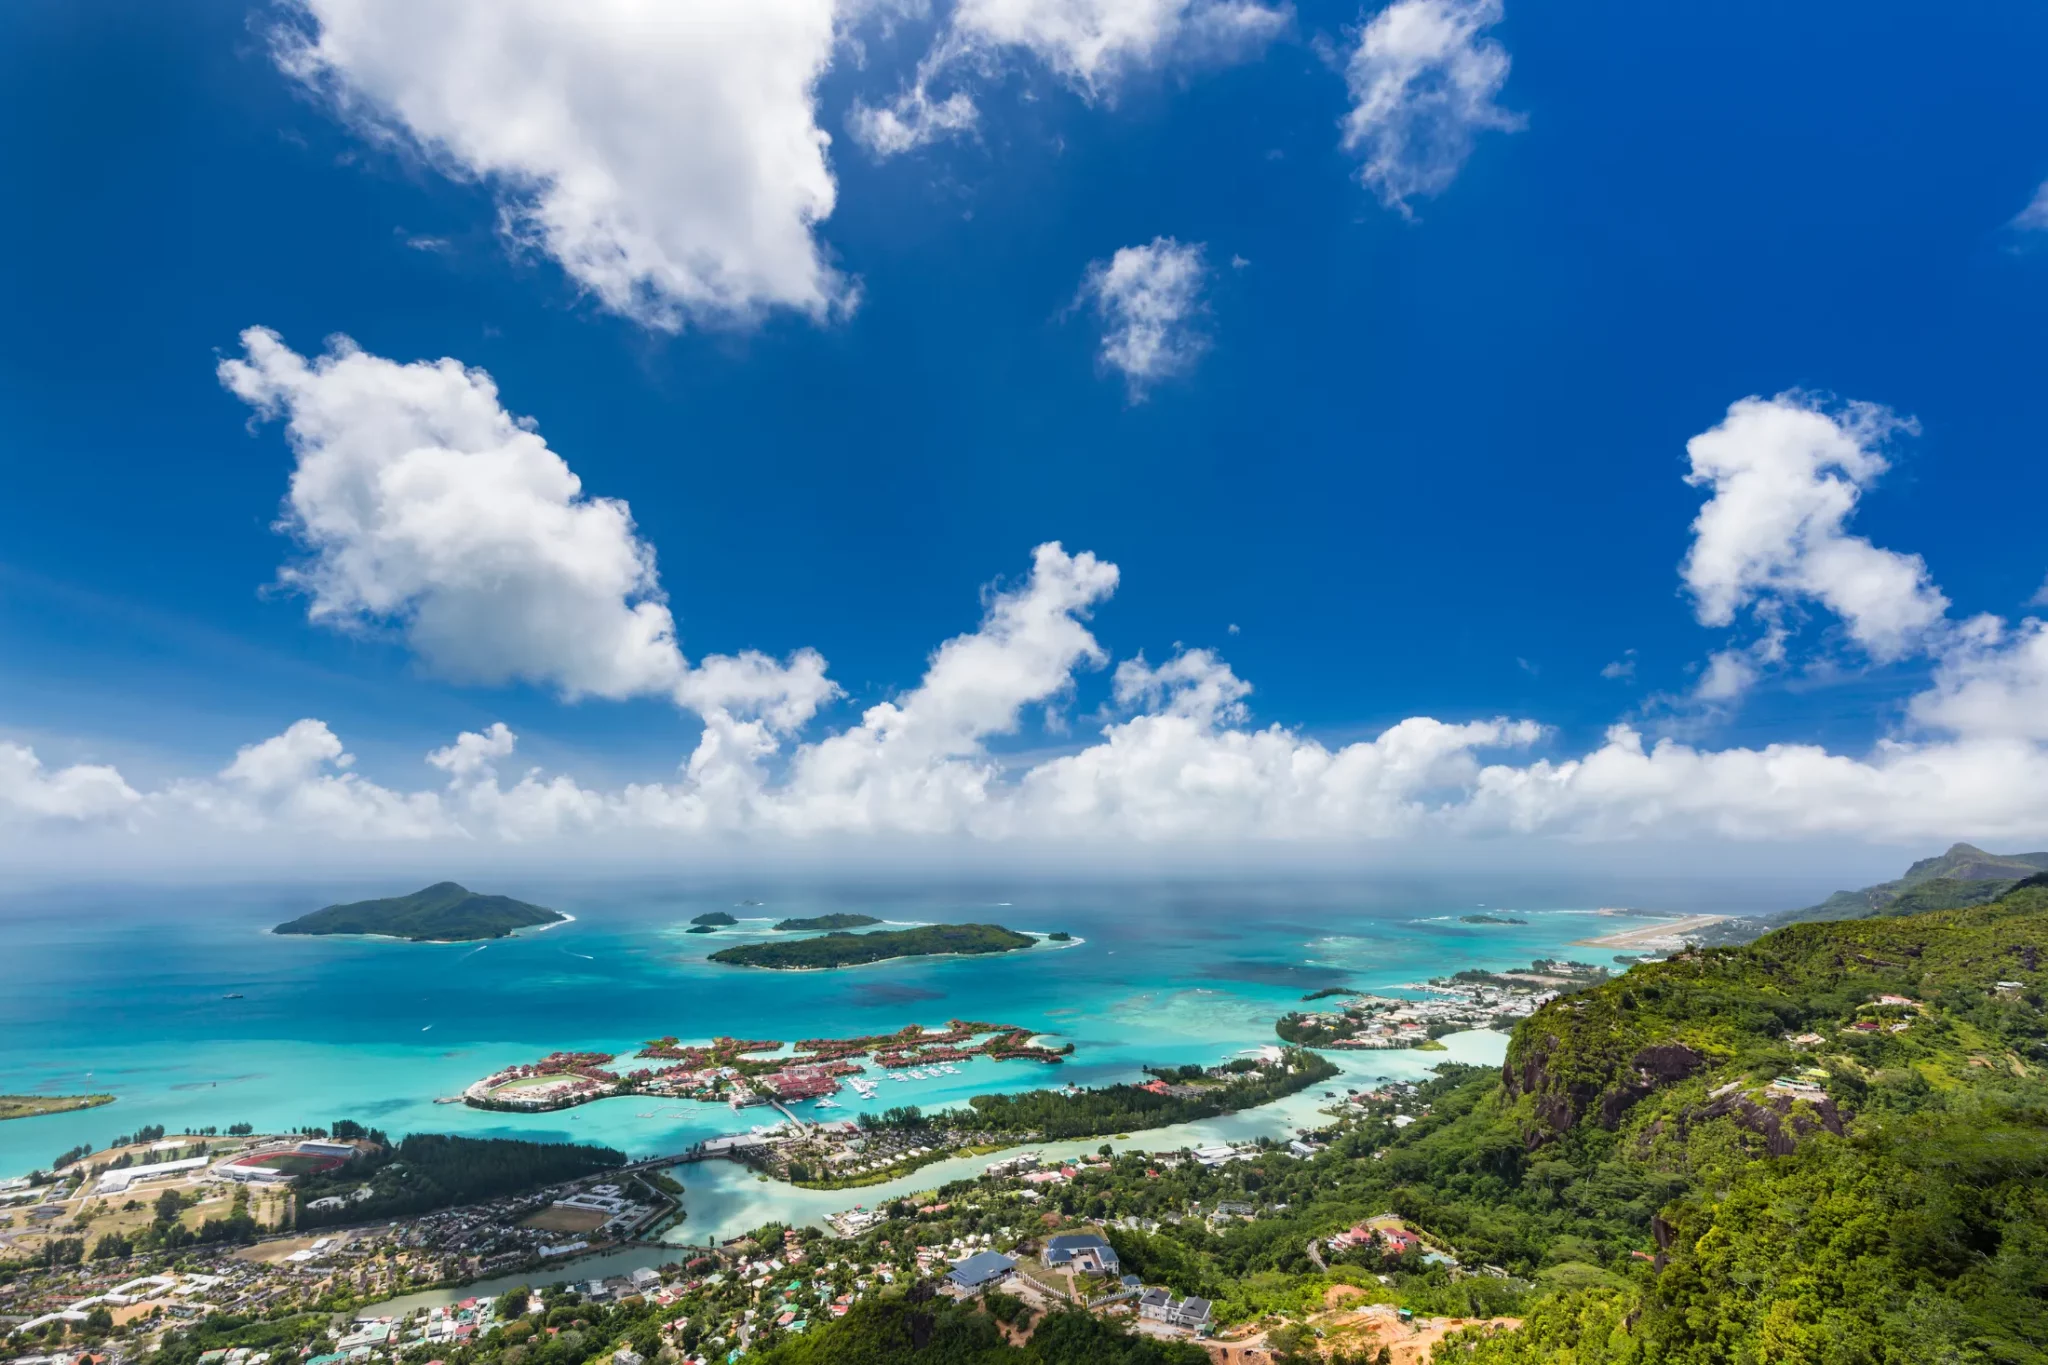 View of Mahe Seychelles with the capital Victoria in the foreground.